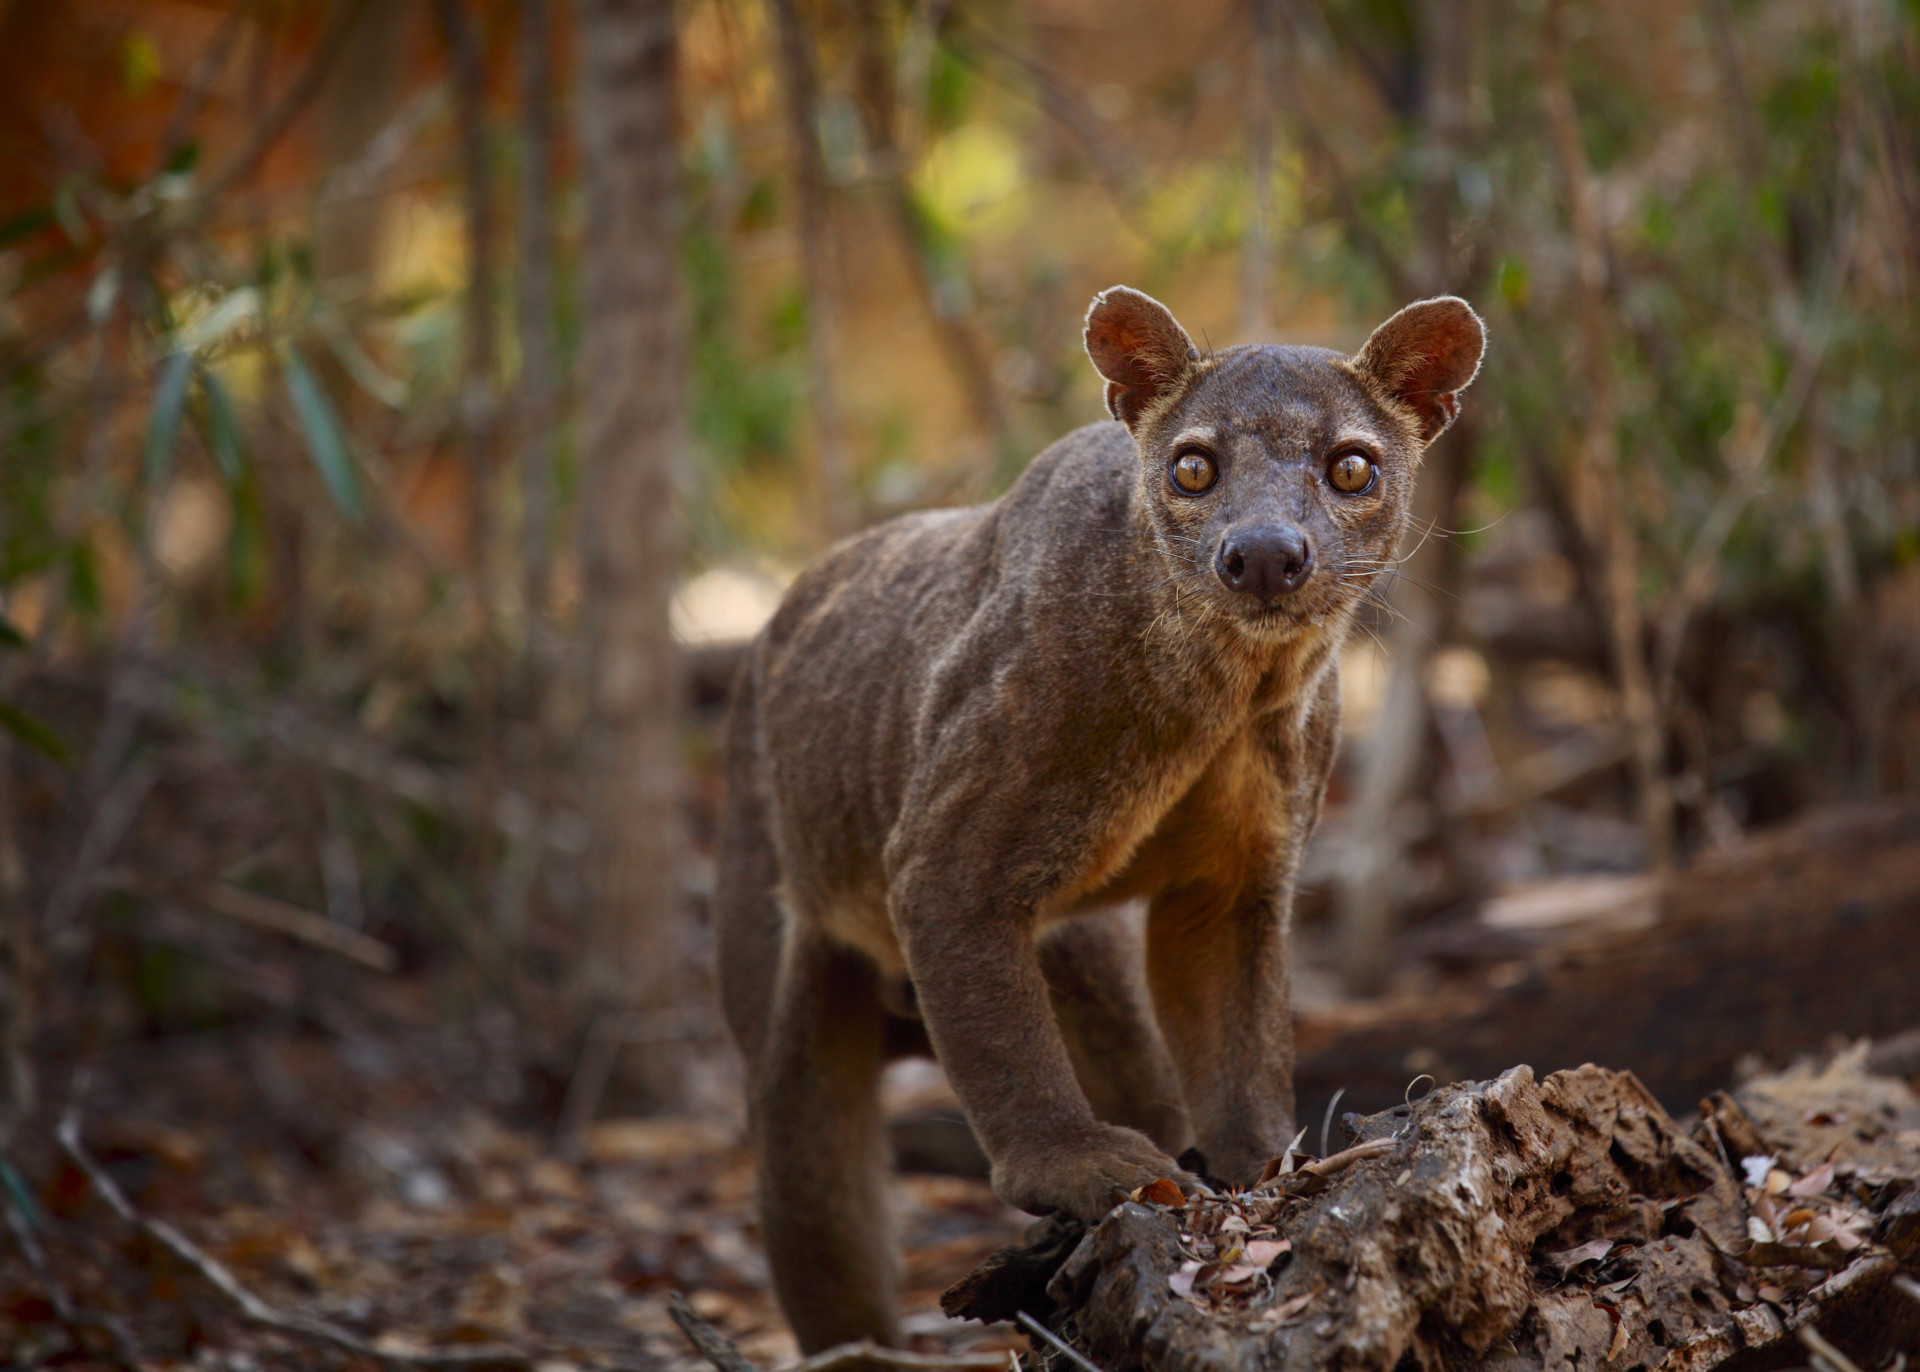 The cat-like fossa is Madagascar's very own cougar, although the animal is closely related to the mongoose family. <p><a href="https://www.msn.com/en-us/community/channel/vid-7xx8mnucu55yw63we9va2gwr7uihbxwc68fxqp25x6tg4ftibpra?cvid=94631541bc0f4f89bfd59158d696ad7e">Follow us and access great exclusive content every day</a></p>